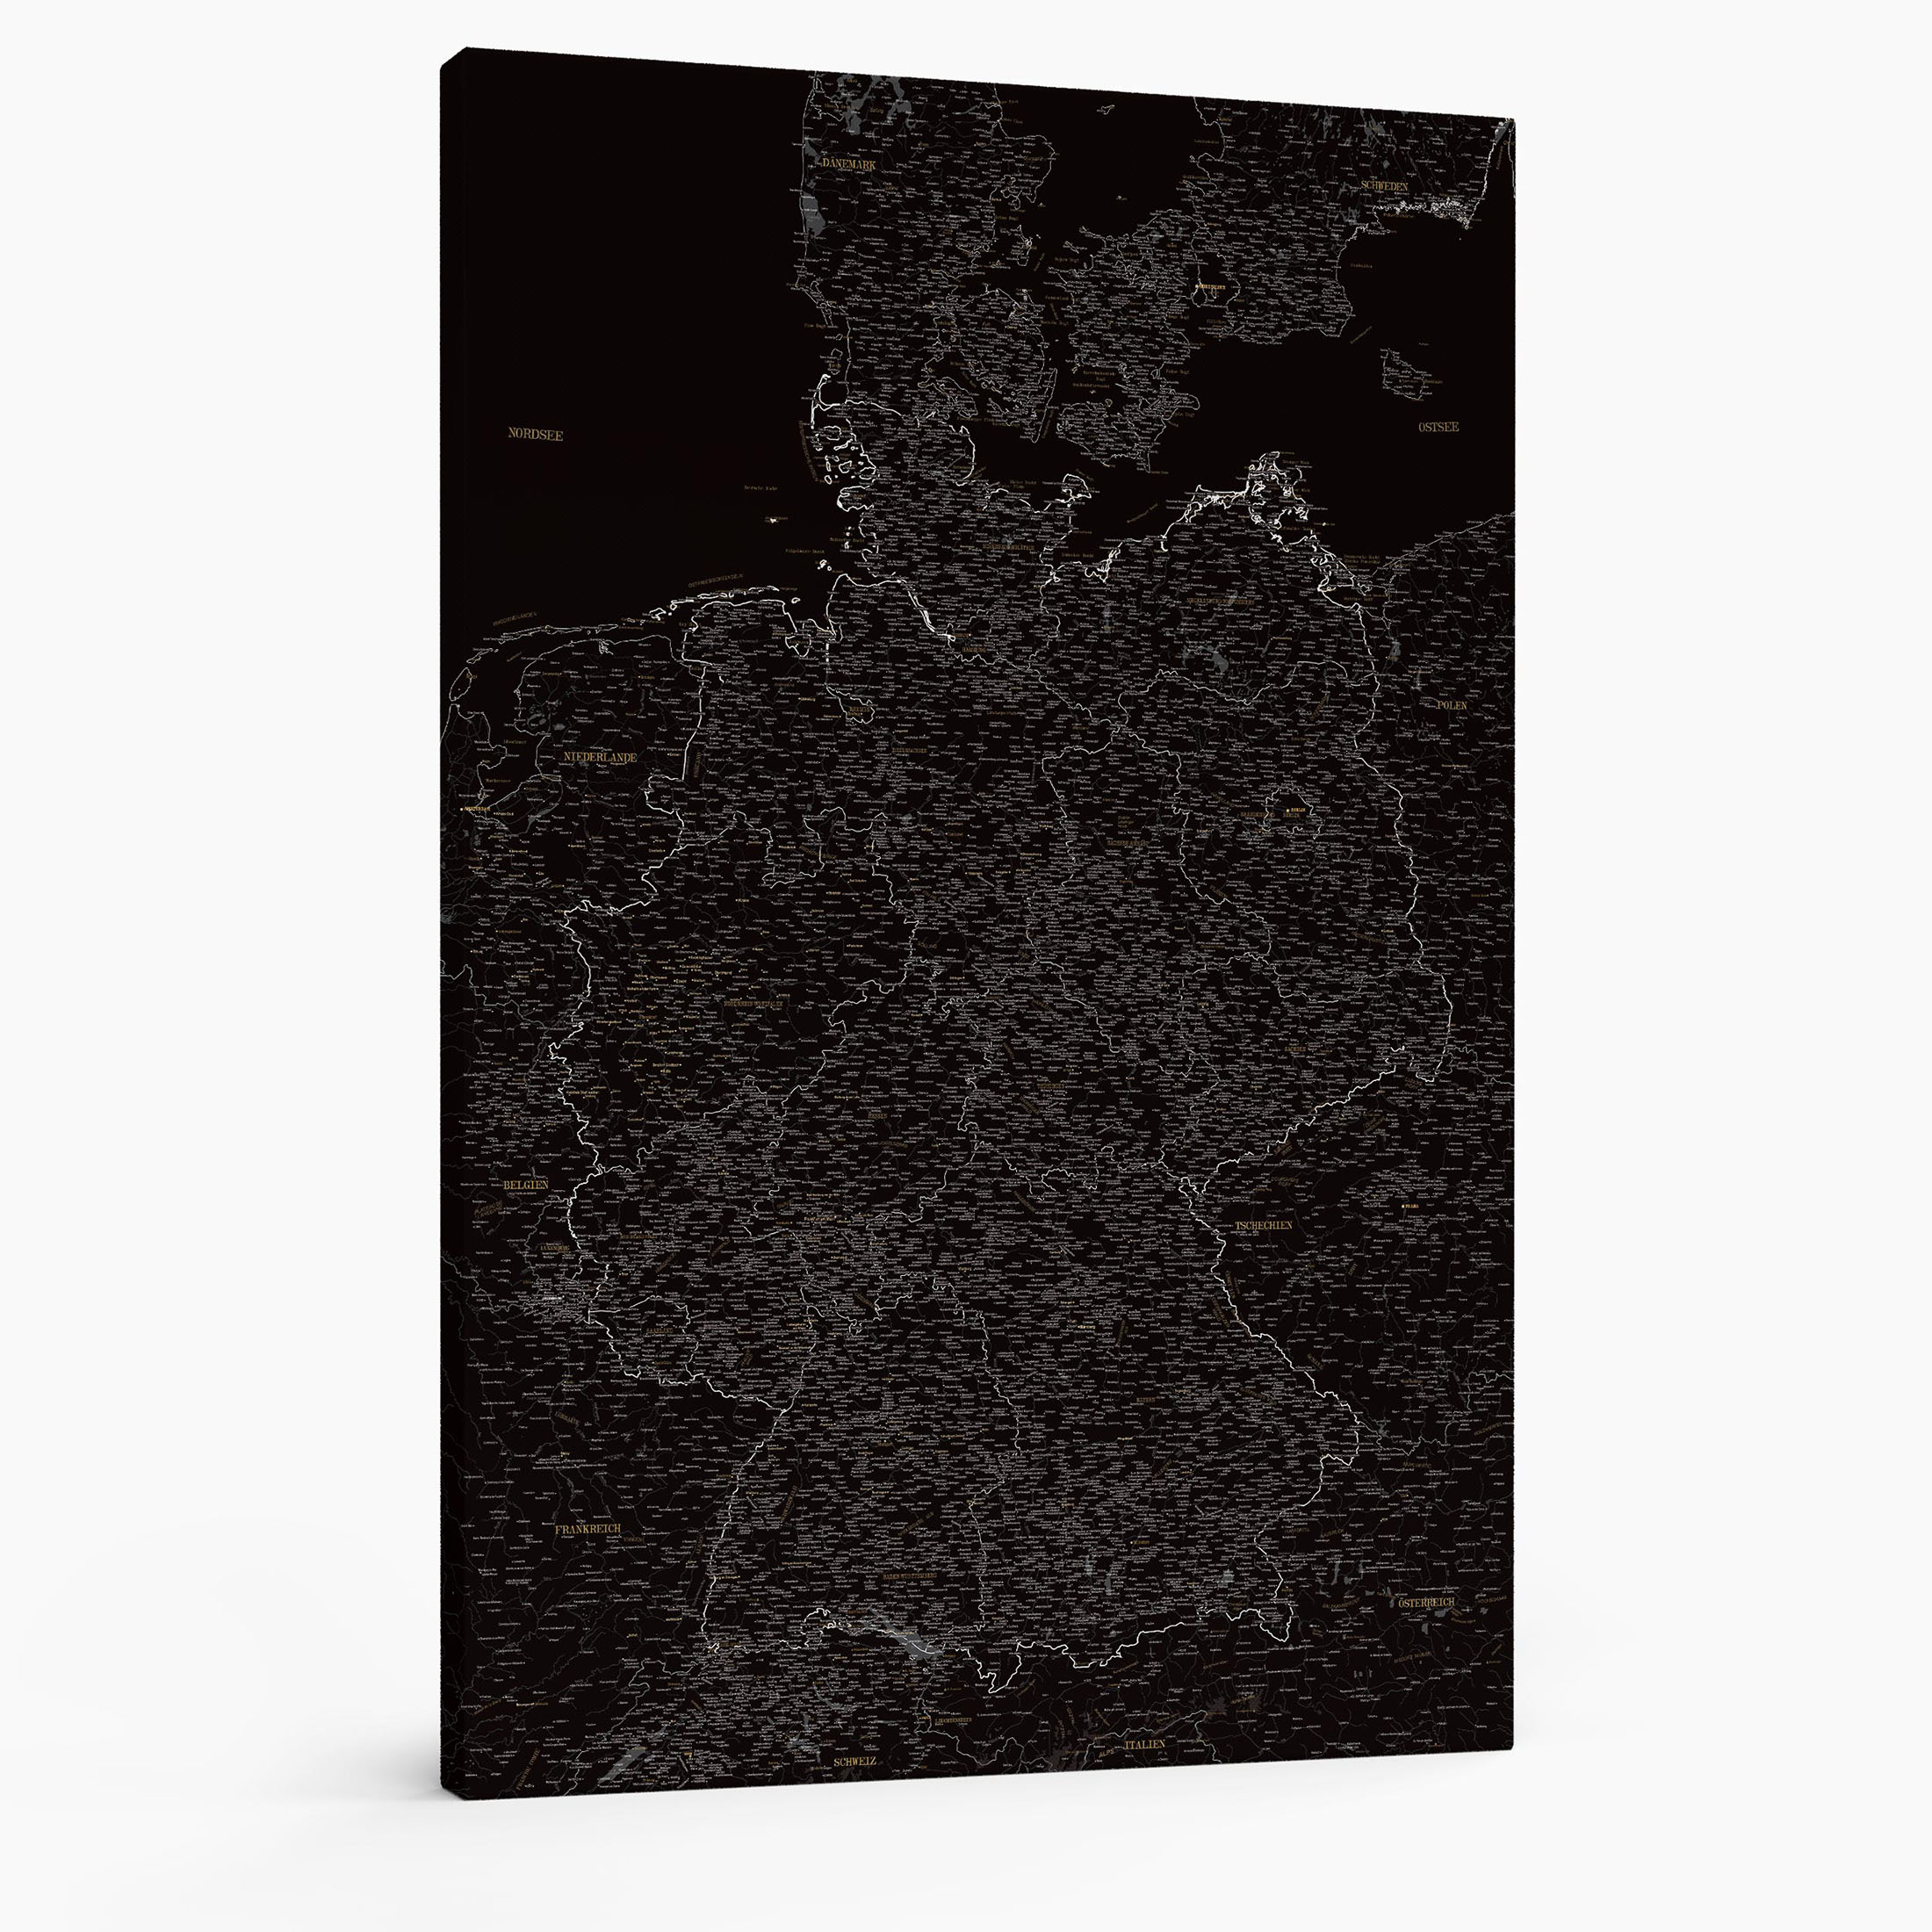 3DE large personalized push pin germany map on canvas tripmap midnight black